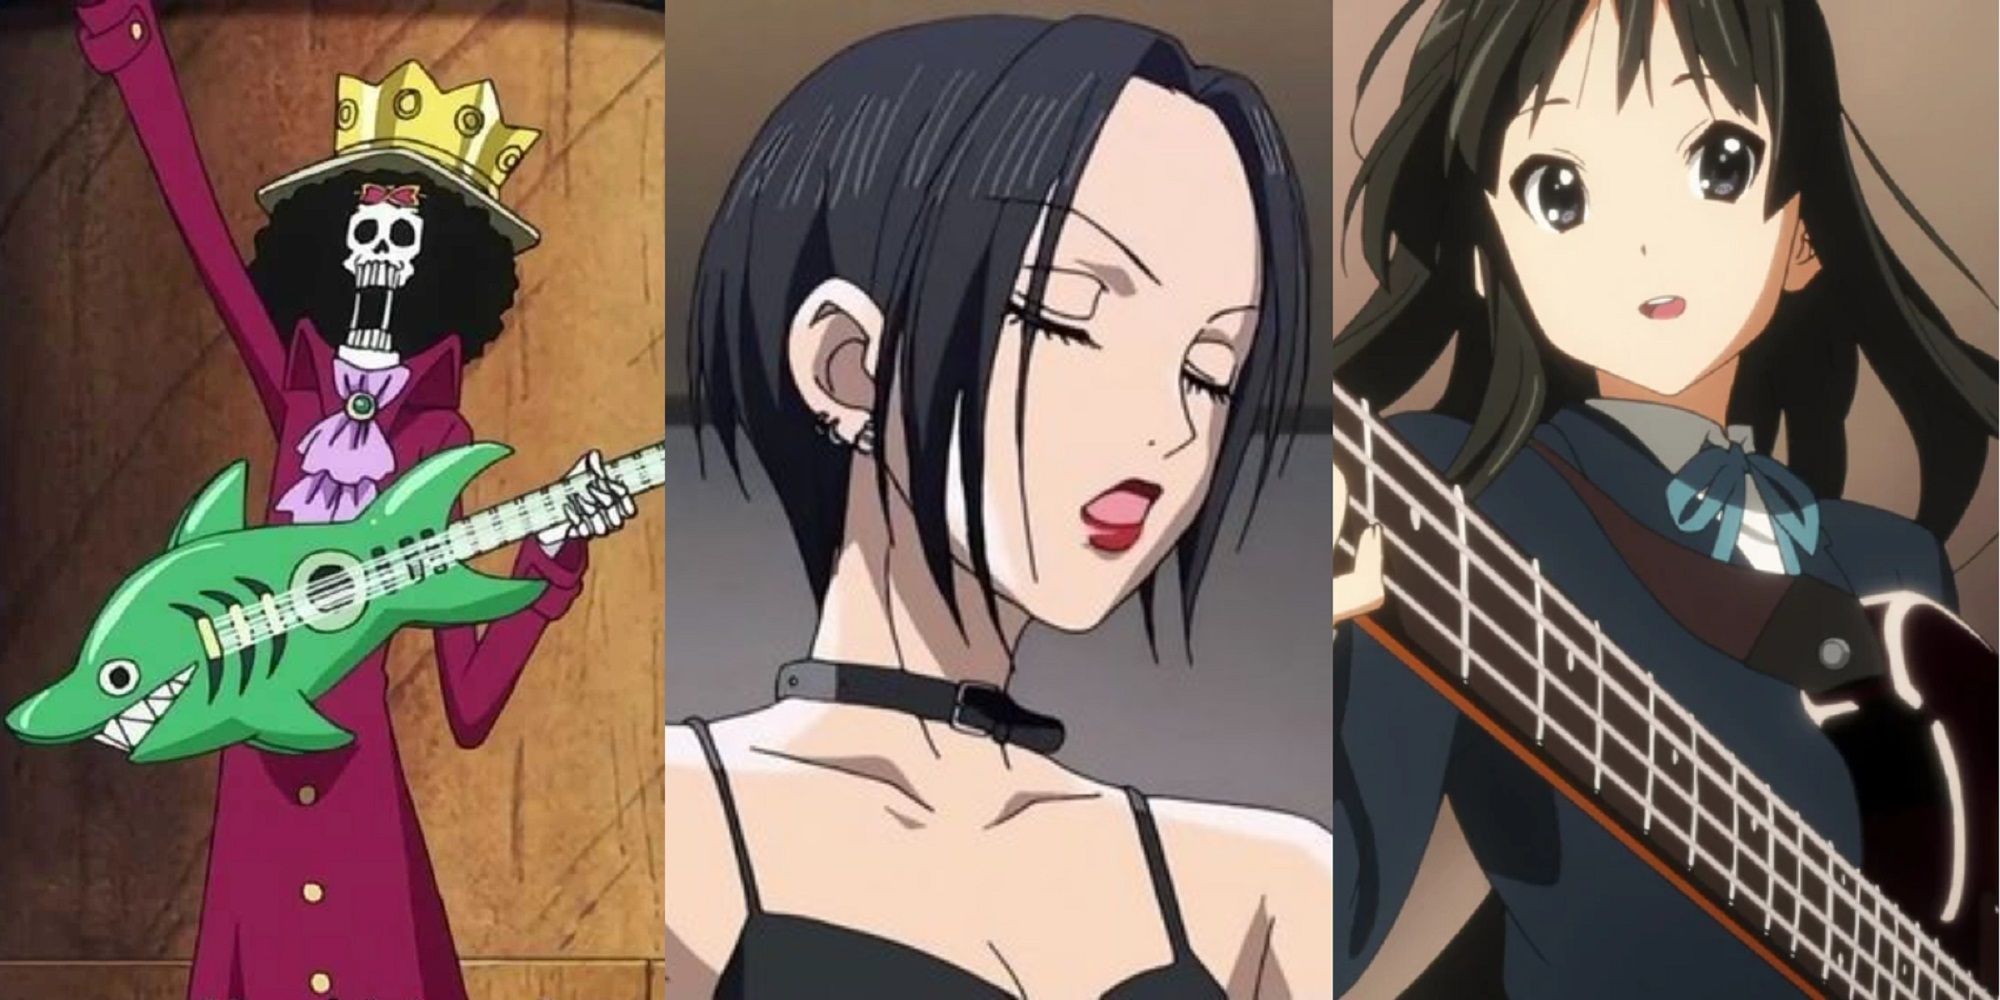 Split image of Brook waving with his guitar in One Piece, a frustrated Nana Osaki from Nana, and Mio Akiyama playing her bass in K-ON!